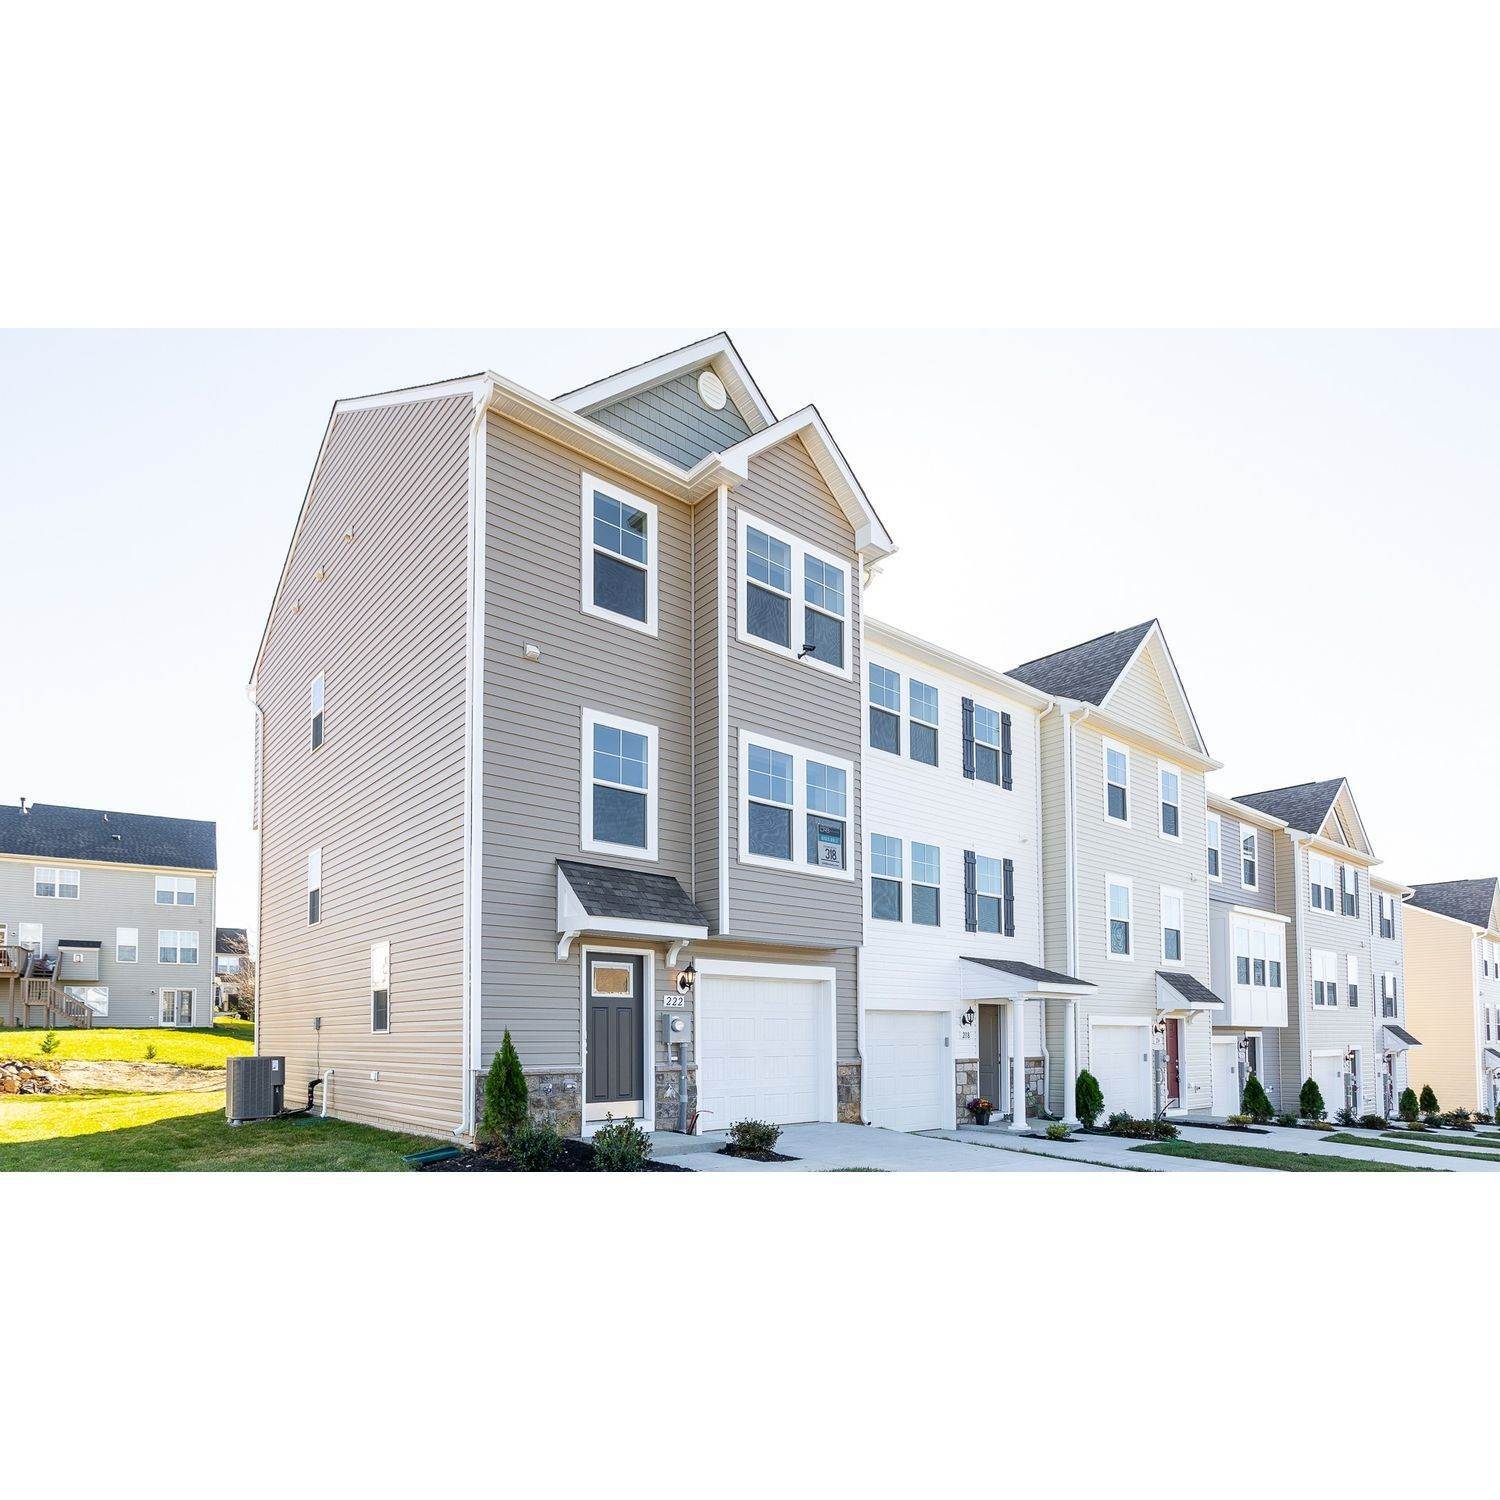 3. 46 Capshaw Road, Martinsburg, WV 25403에 Archer's Rock Townhomes 건물